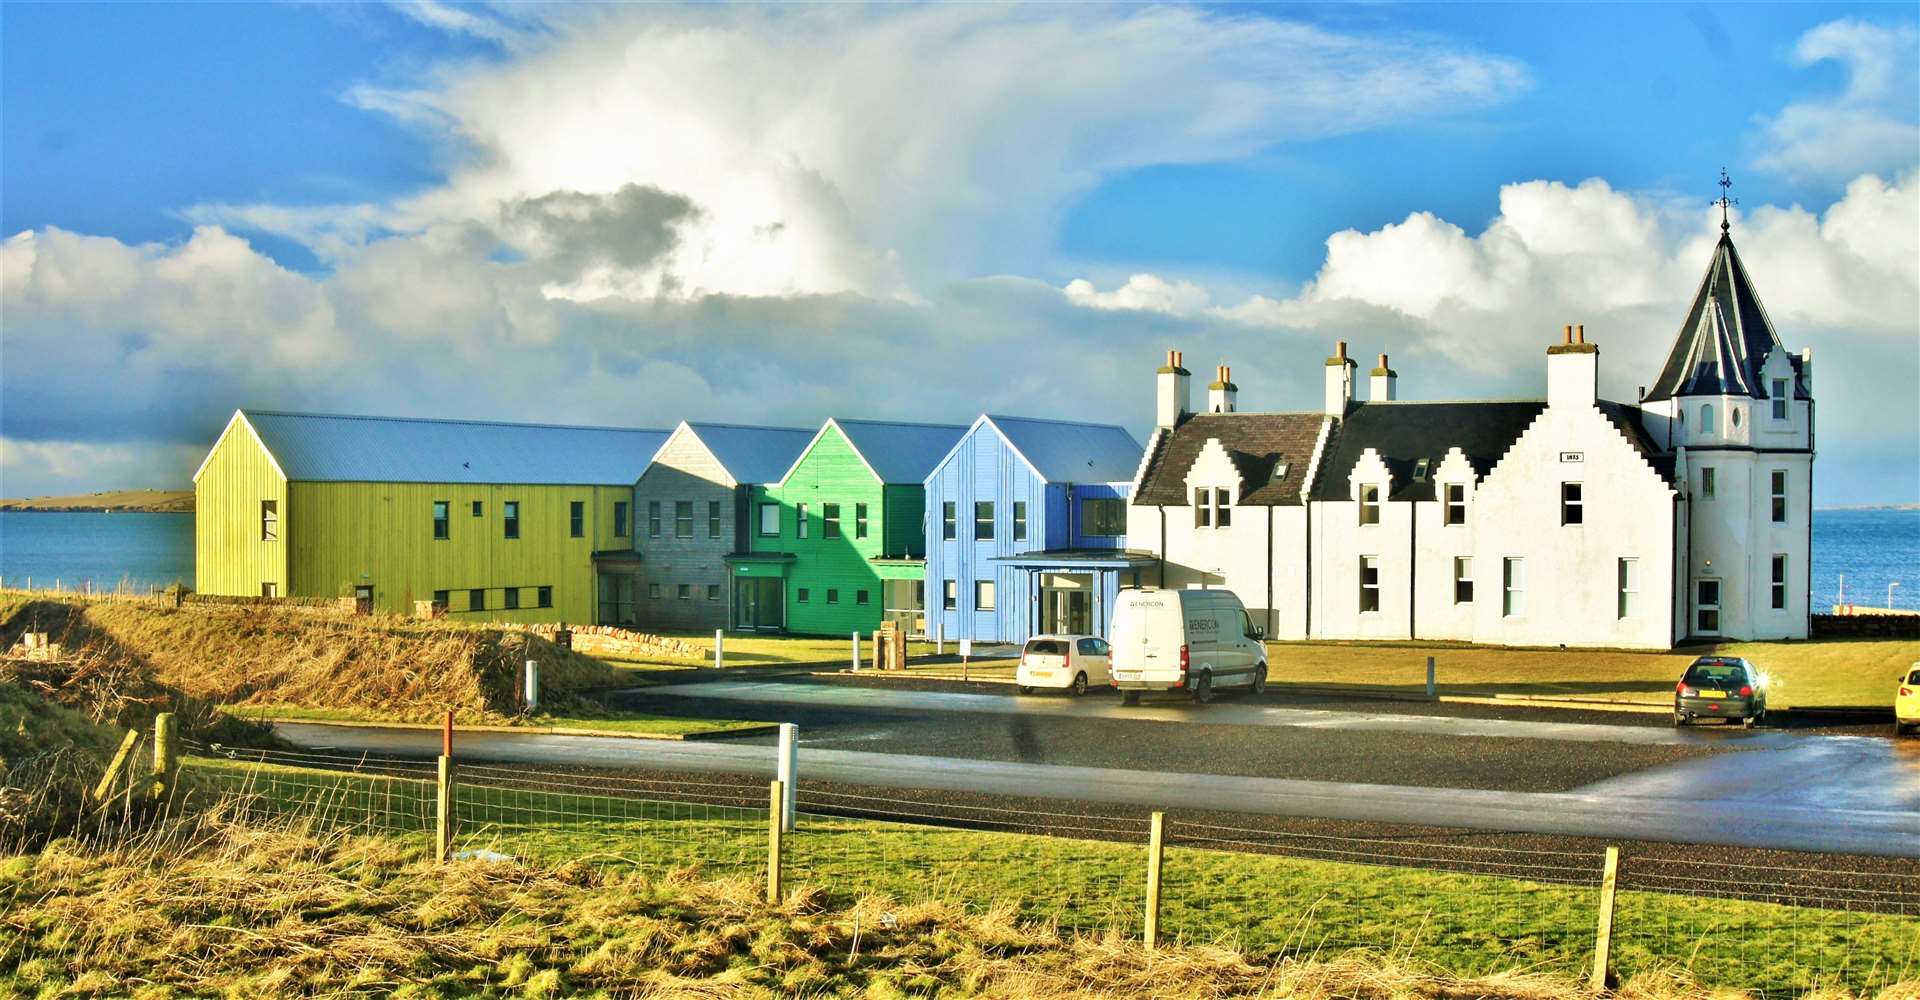 John O'Groats Hotel – Caithness is considered a perfect location for glamping. Picture: DGS